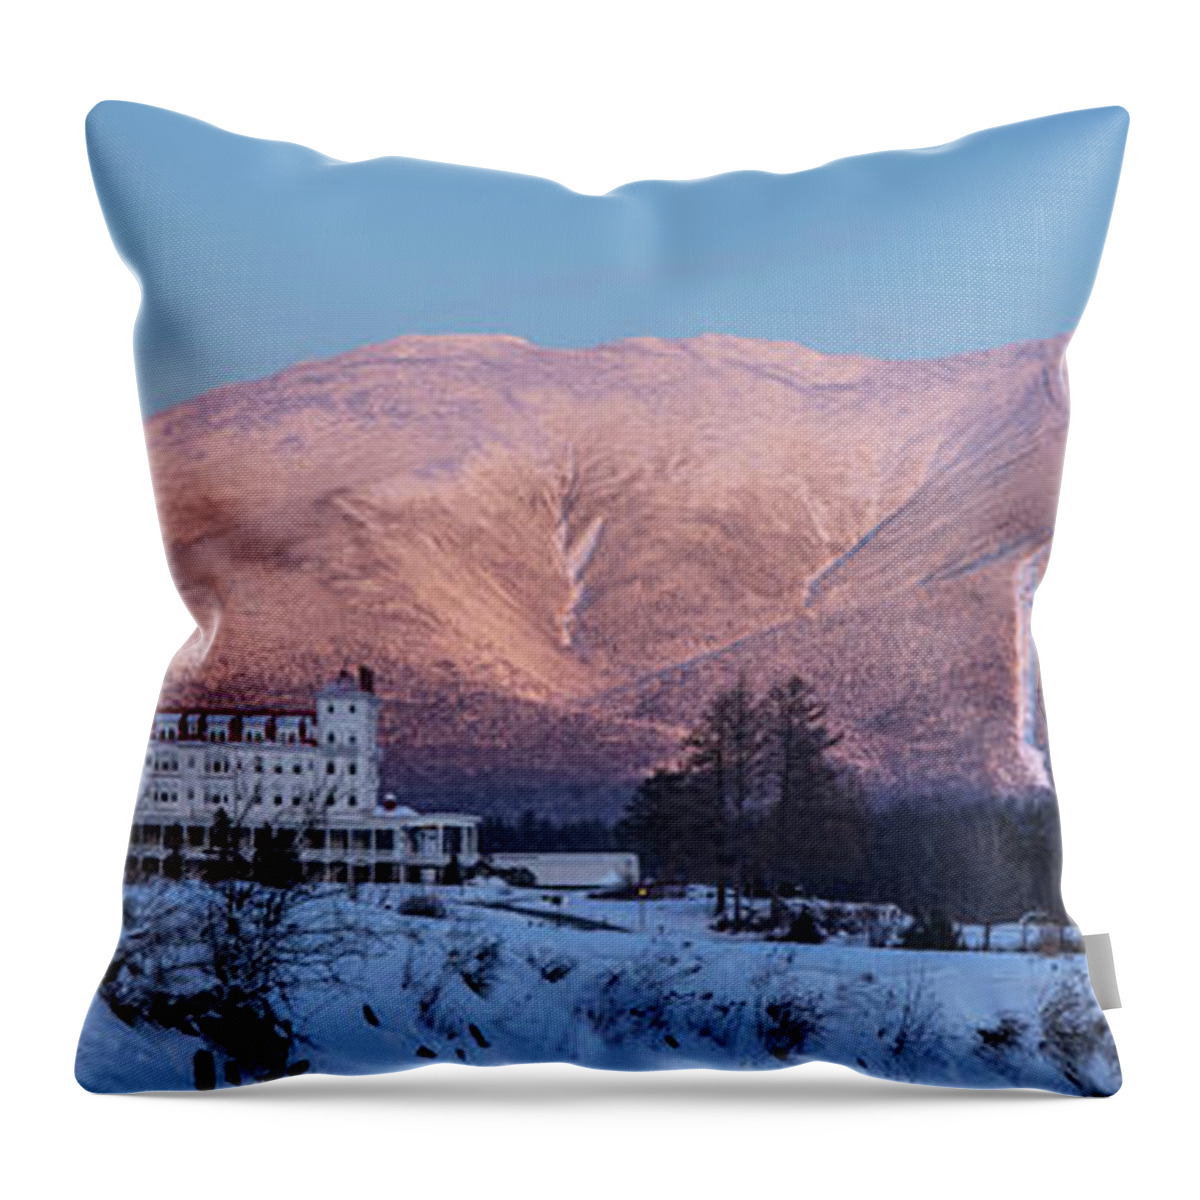 Omni Throw Pillow featuring the photograph Omni Alpenglow Winter Moonrise Panorama by White Mountain Images